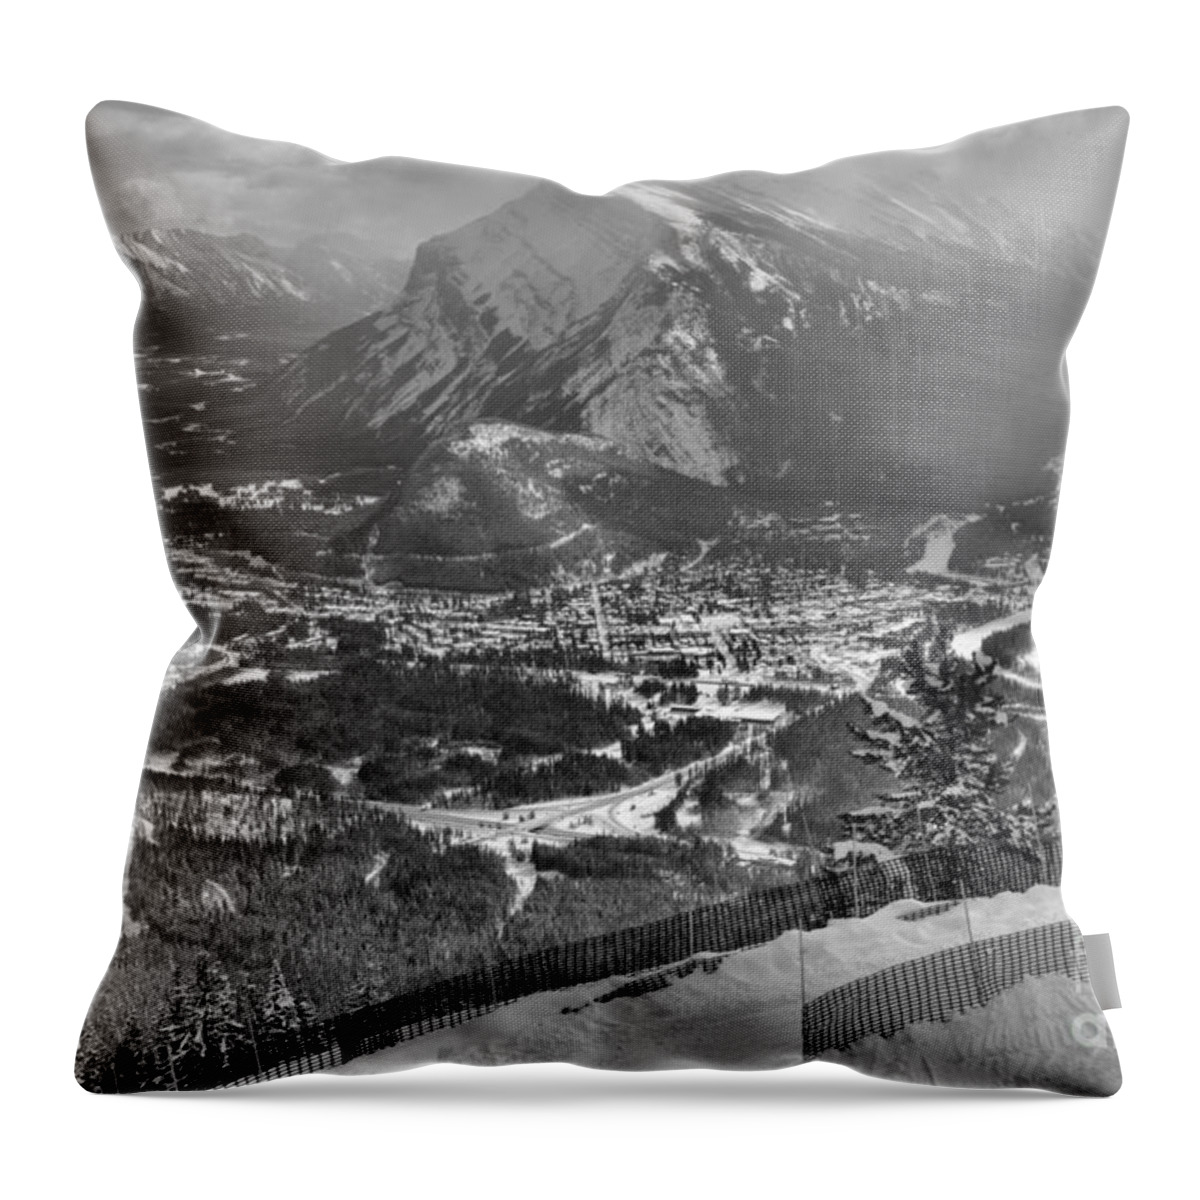 Mt Norquay Throw Pillow featuring the photograph Winter Views From Mt. Norquay Black And White by Adam Jewell